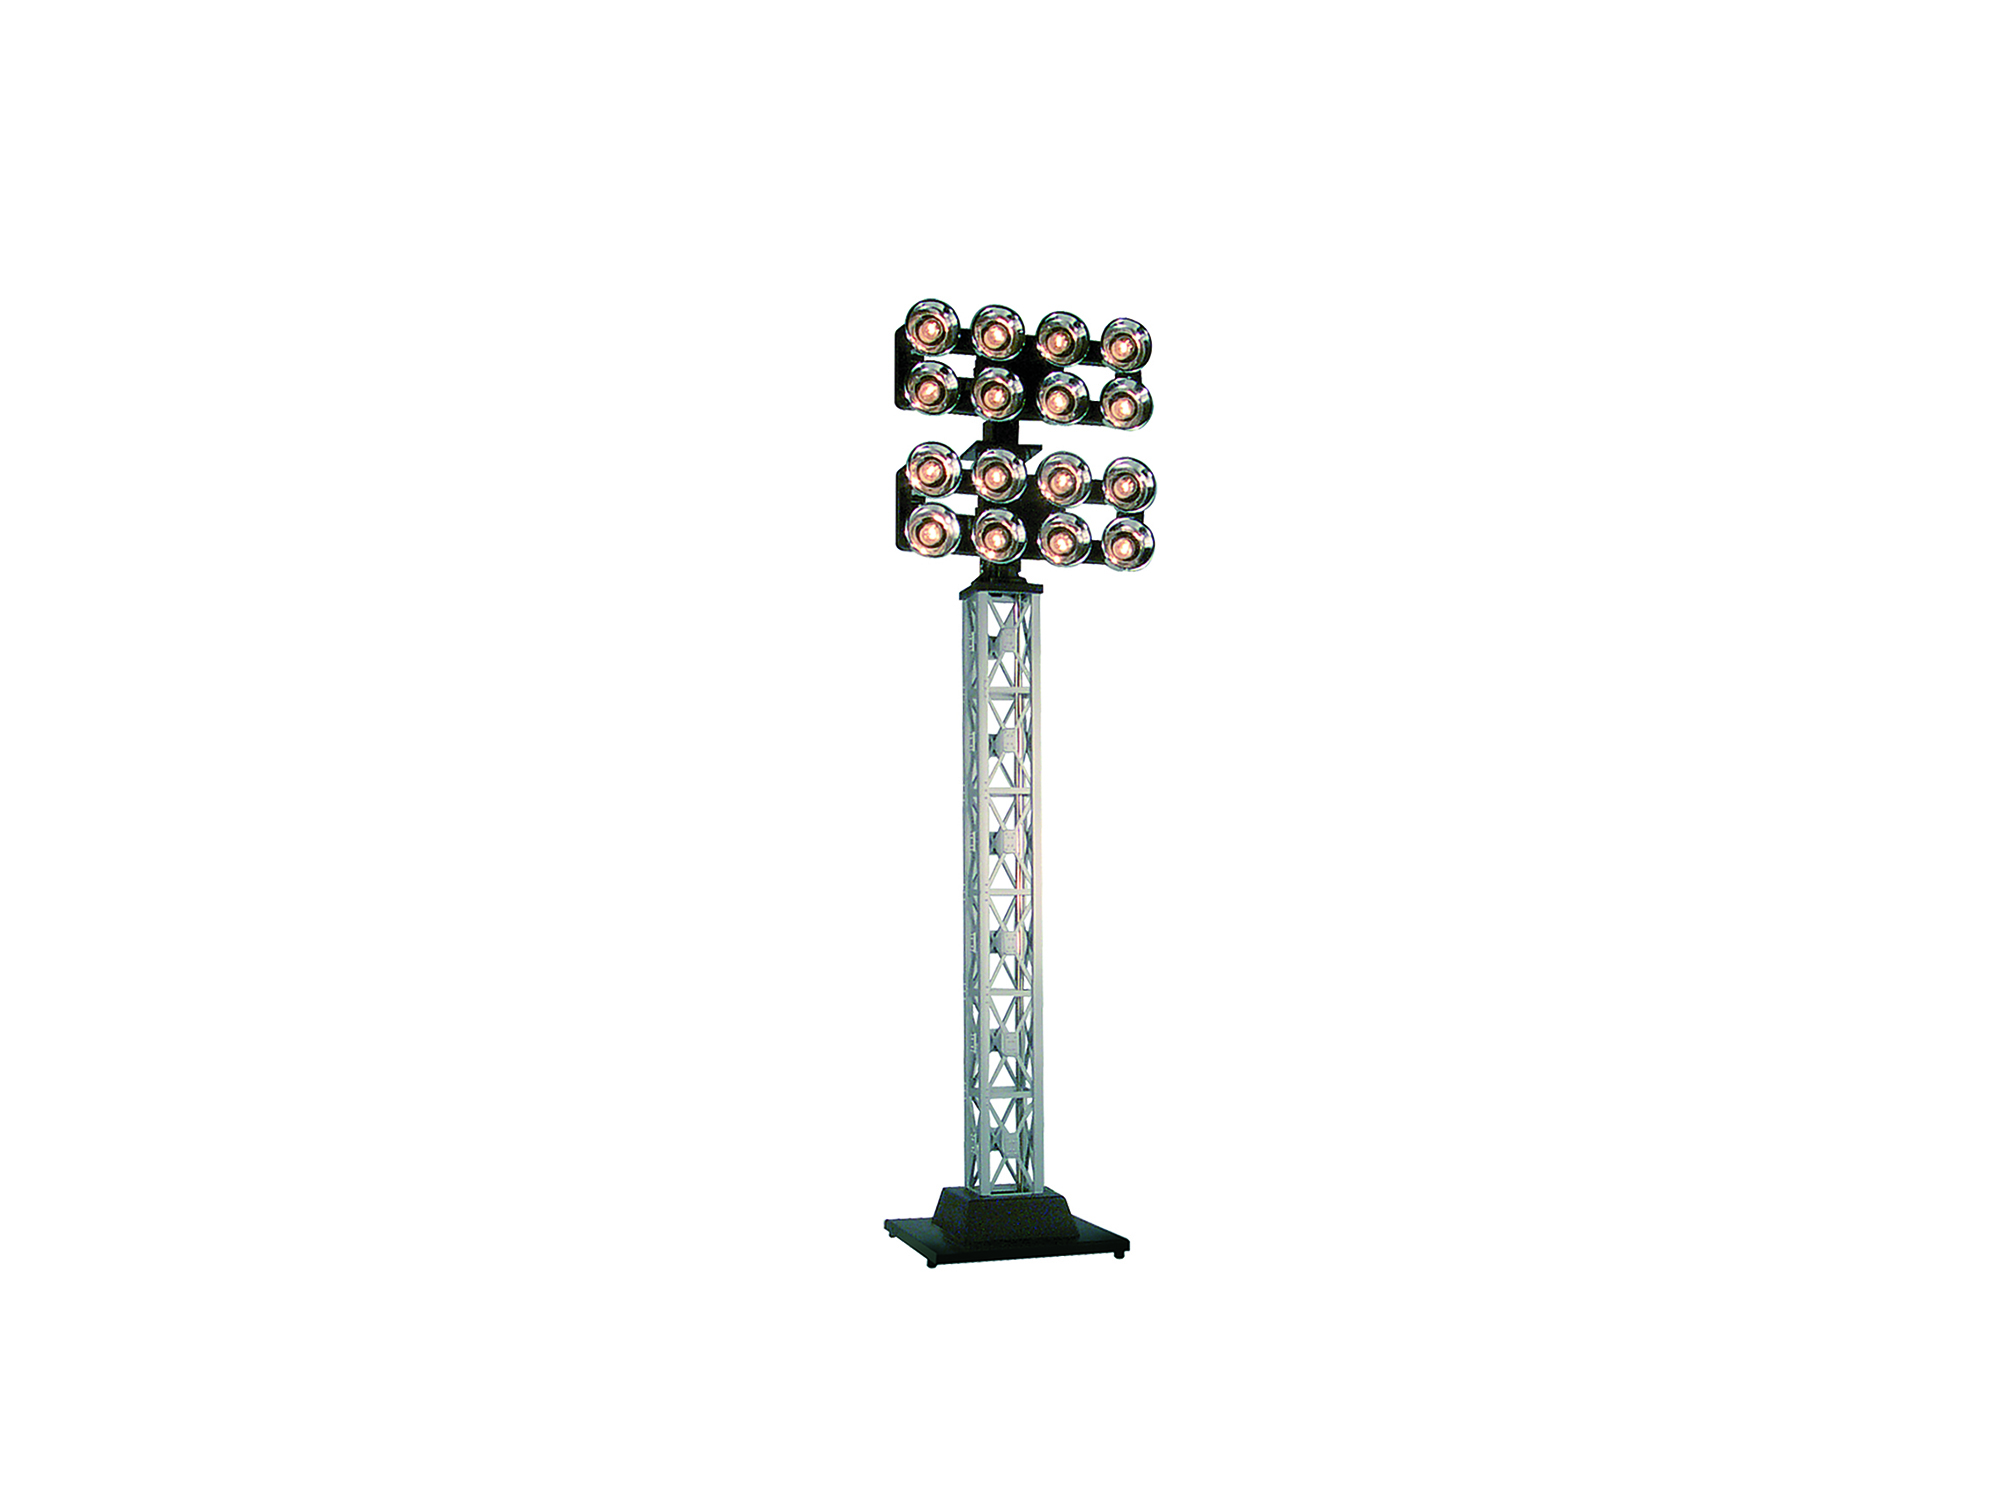 6-82013 DOUBLE FLOODLIGHT TOWER